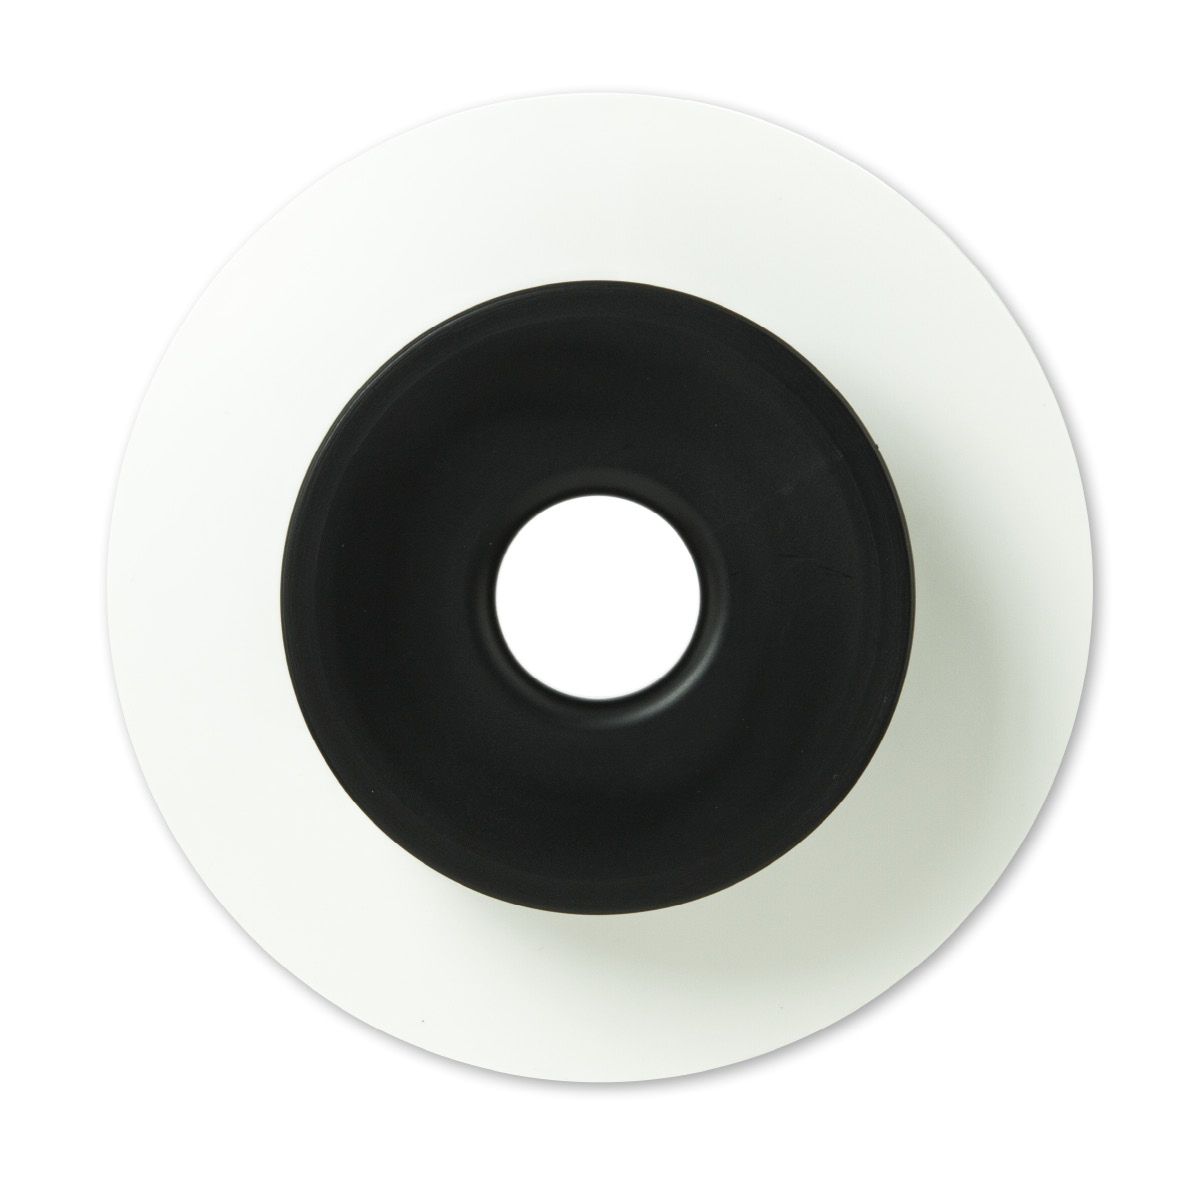 Pair of PLA spools: Black and White